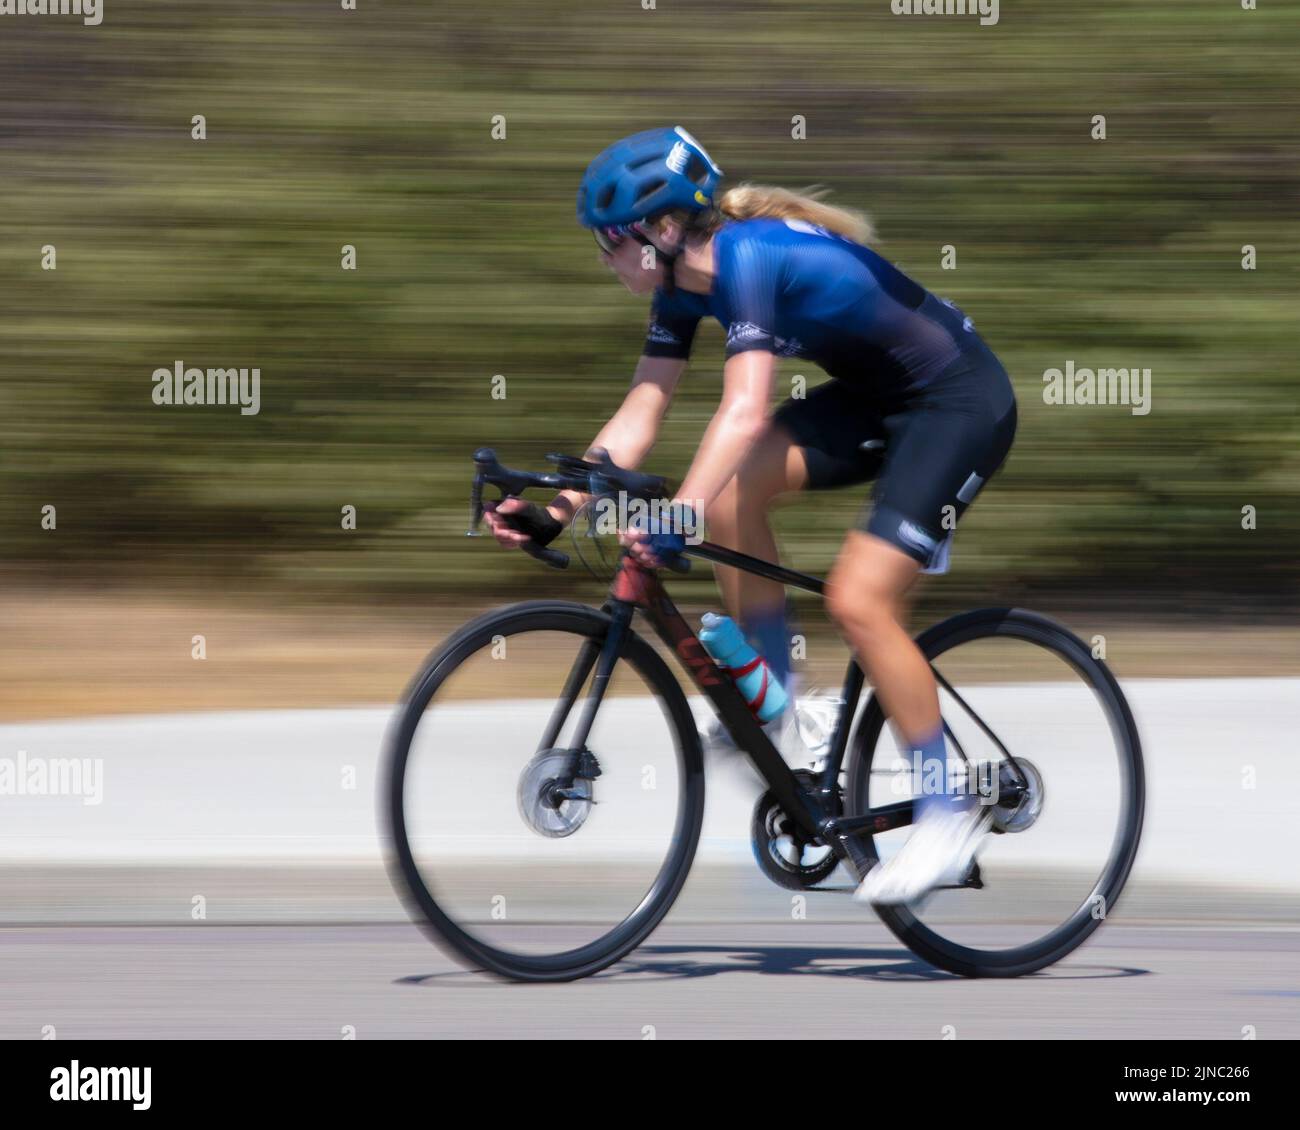 Female cyclist in the lead riding her bike on a lap of a Criterium, a fast cycling race around repeated short circuits on city streets. Motion blur. Stock Photo